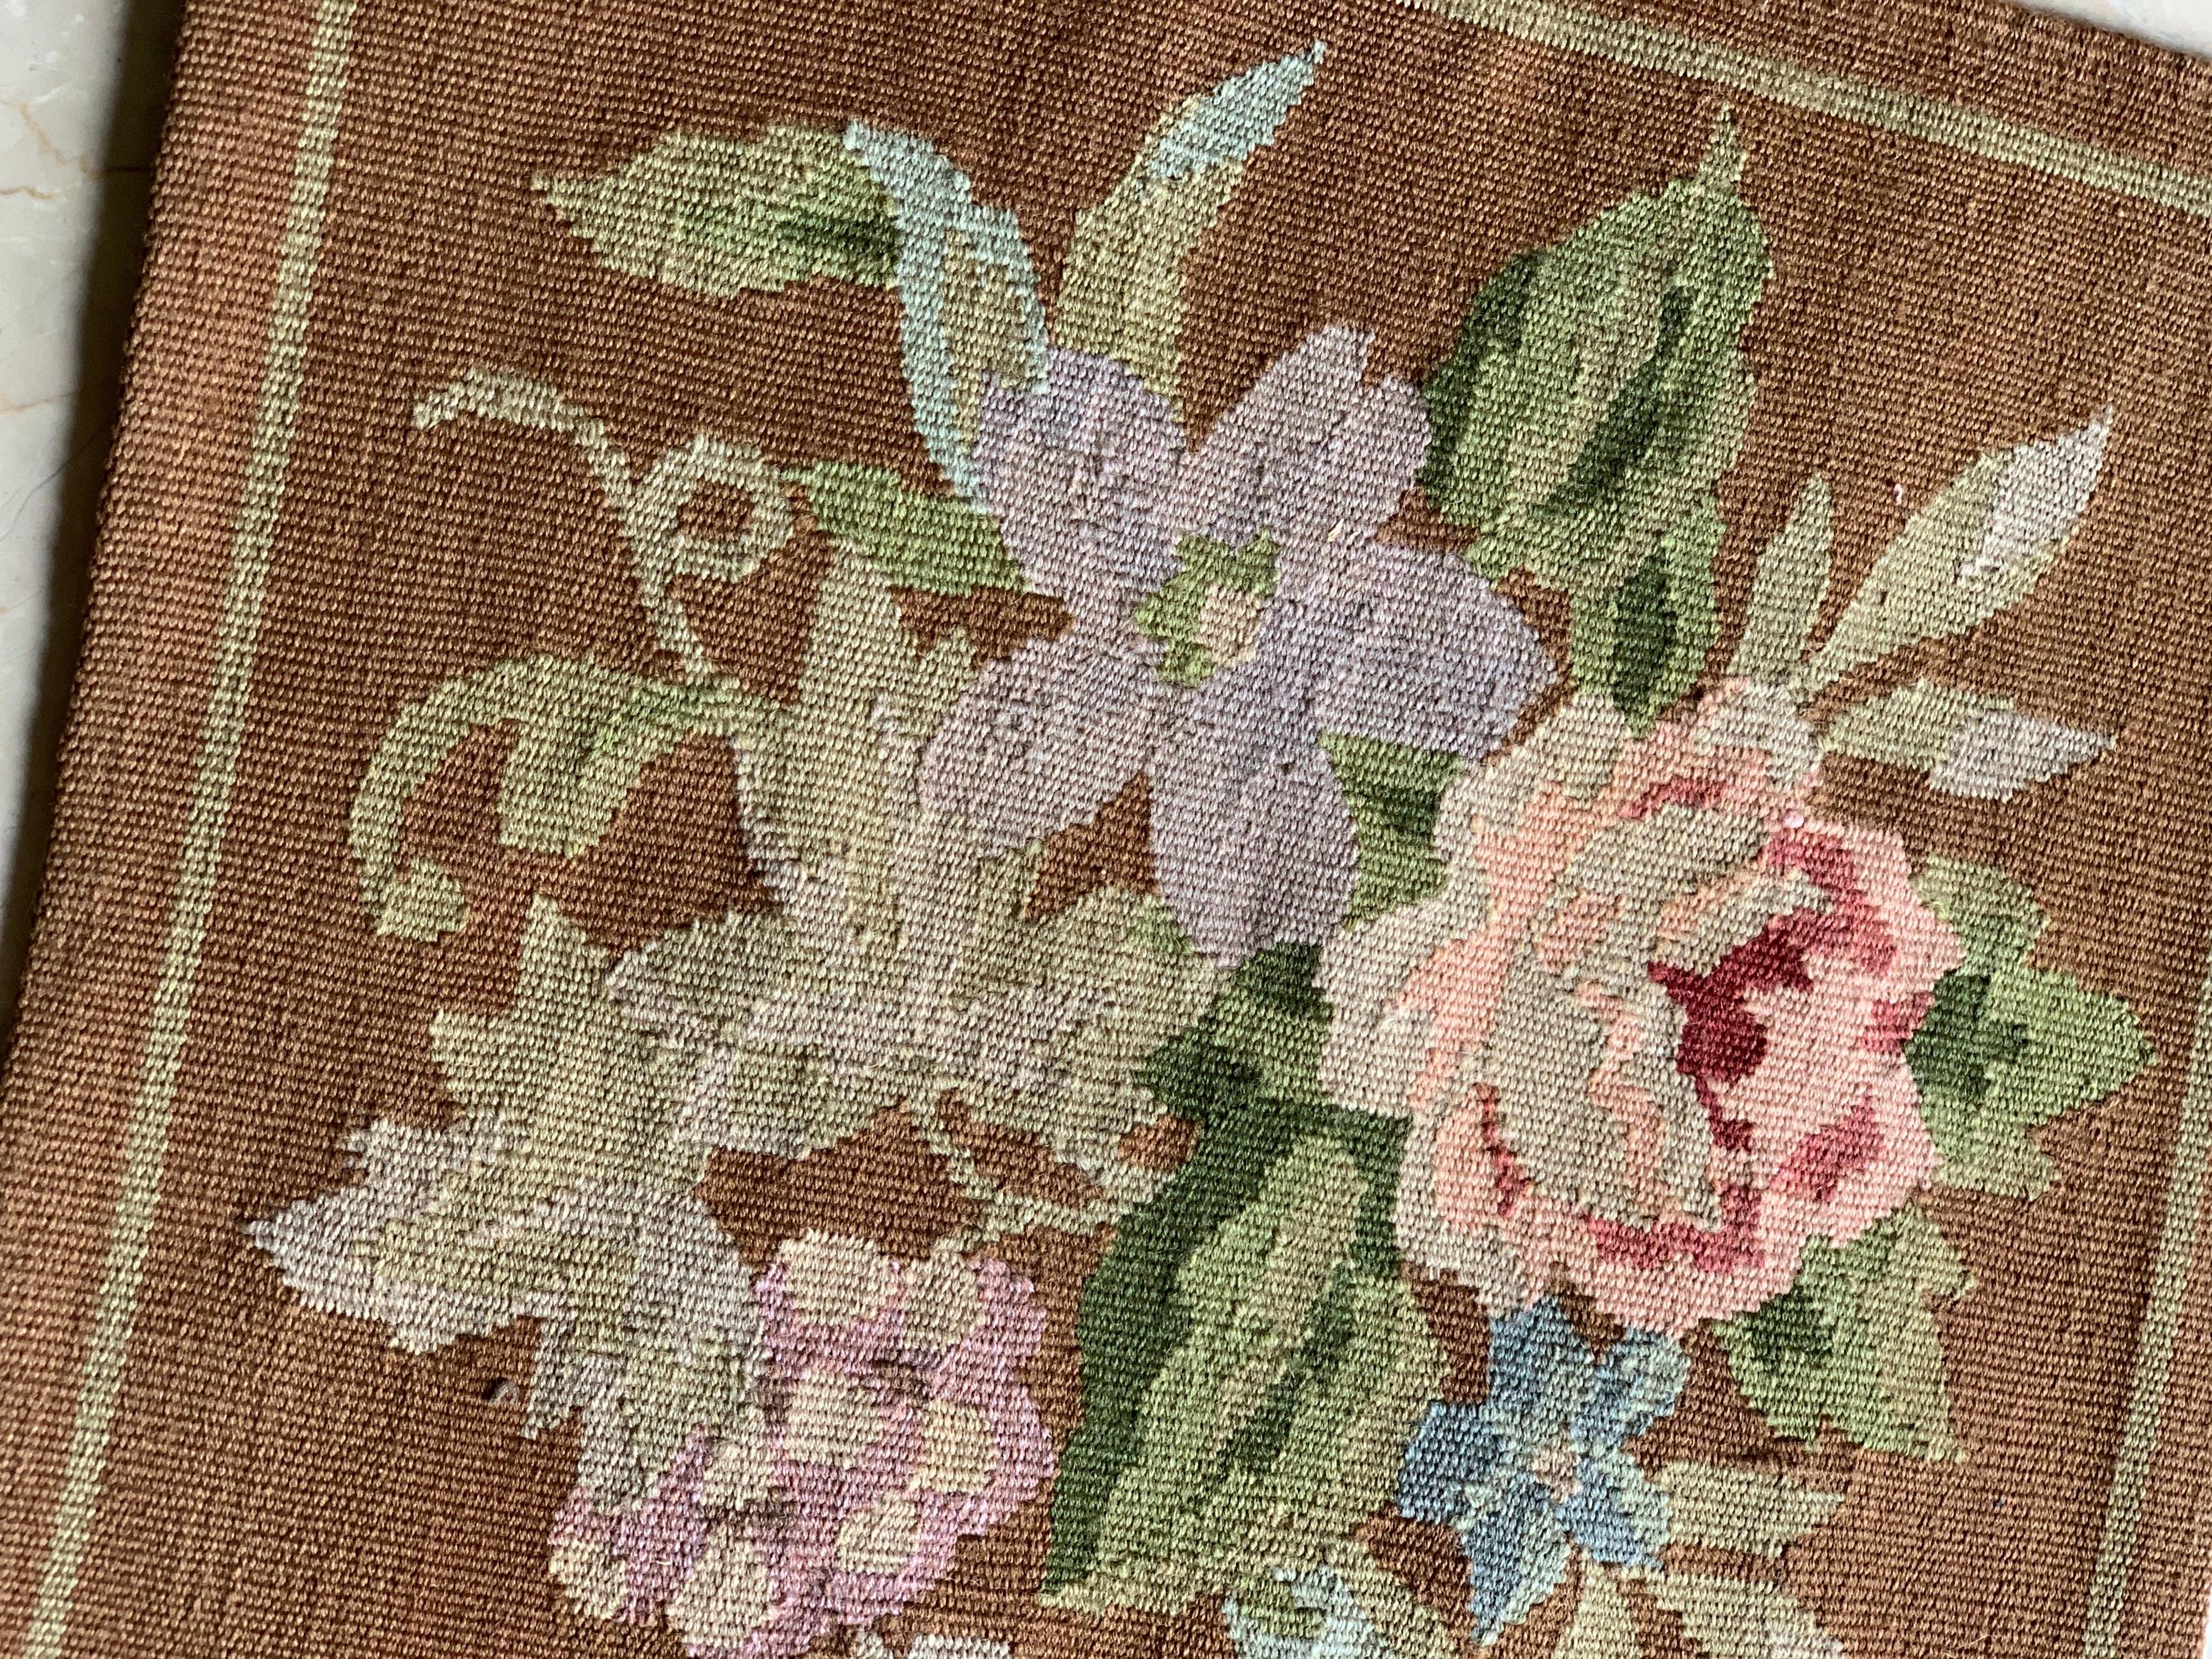 Light brown ivory floral French provincial square needlepoint pillow. Made of wool with an ivory cotton cloth backing. It is new and has never been used.

Measures: 16 x 16 inches. Kindly note that it ships flat without the insert.
 